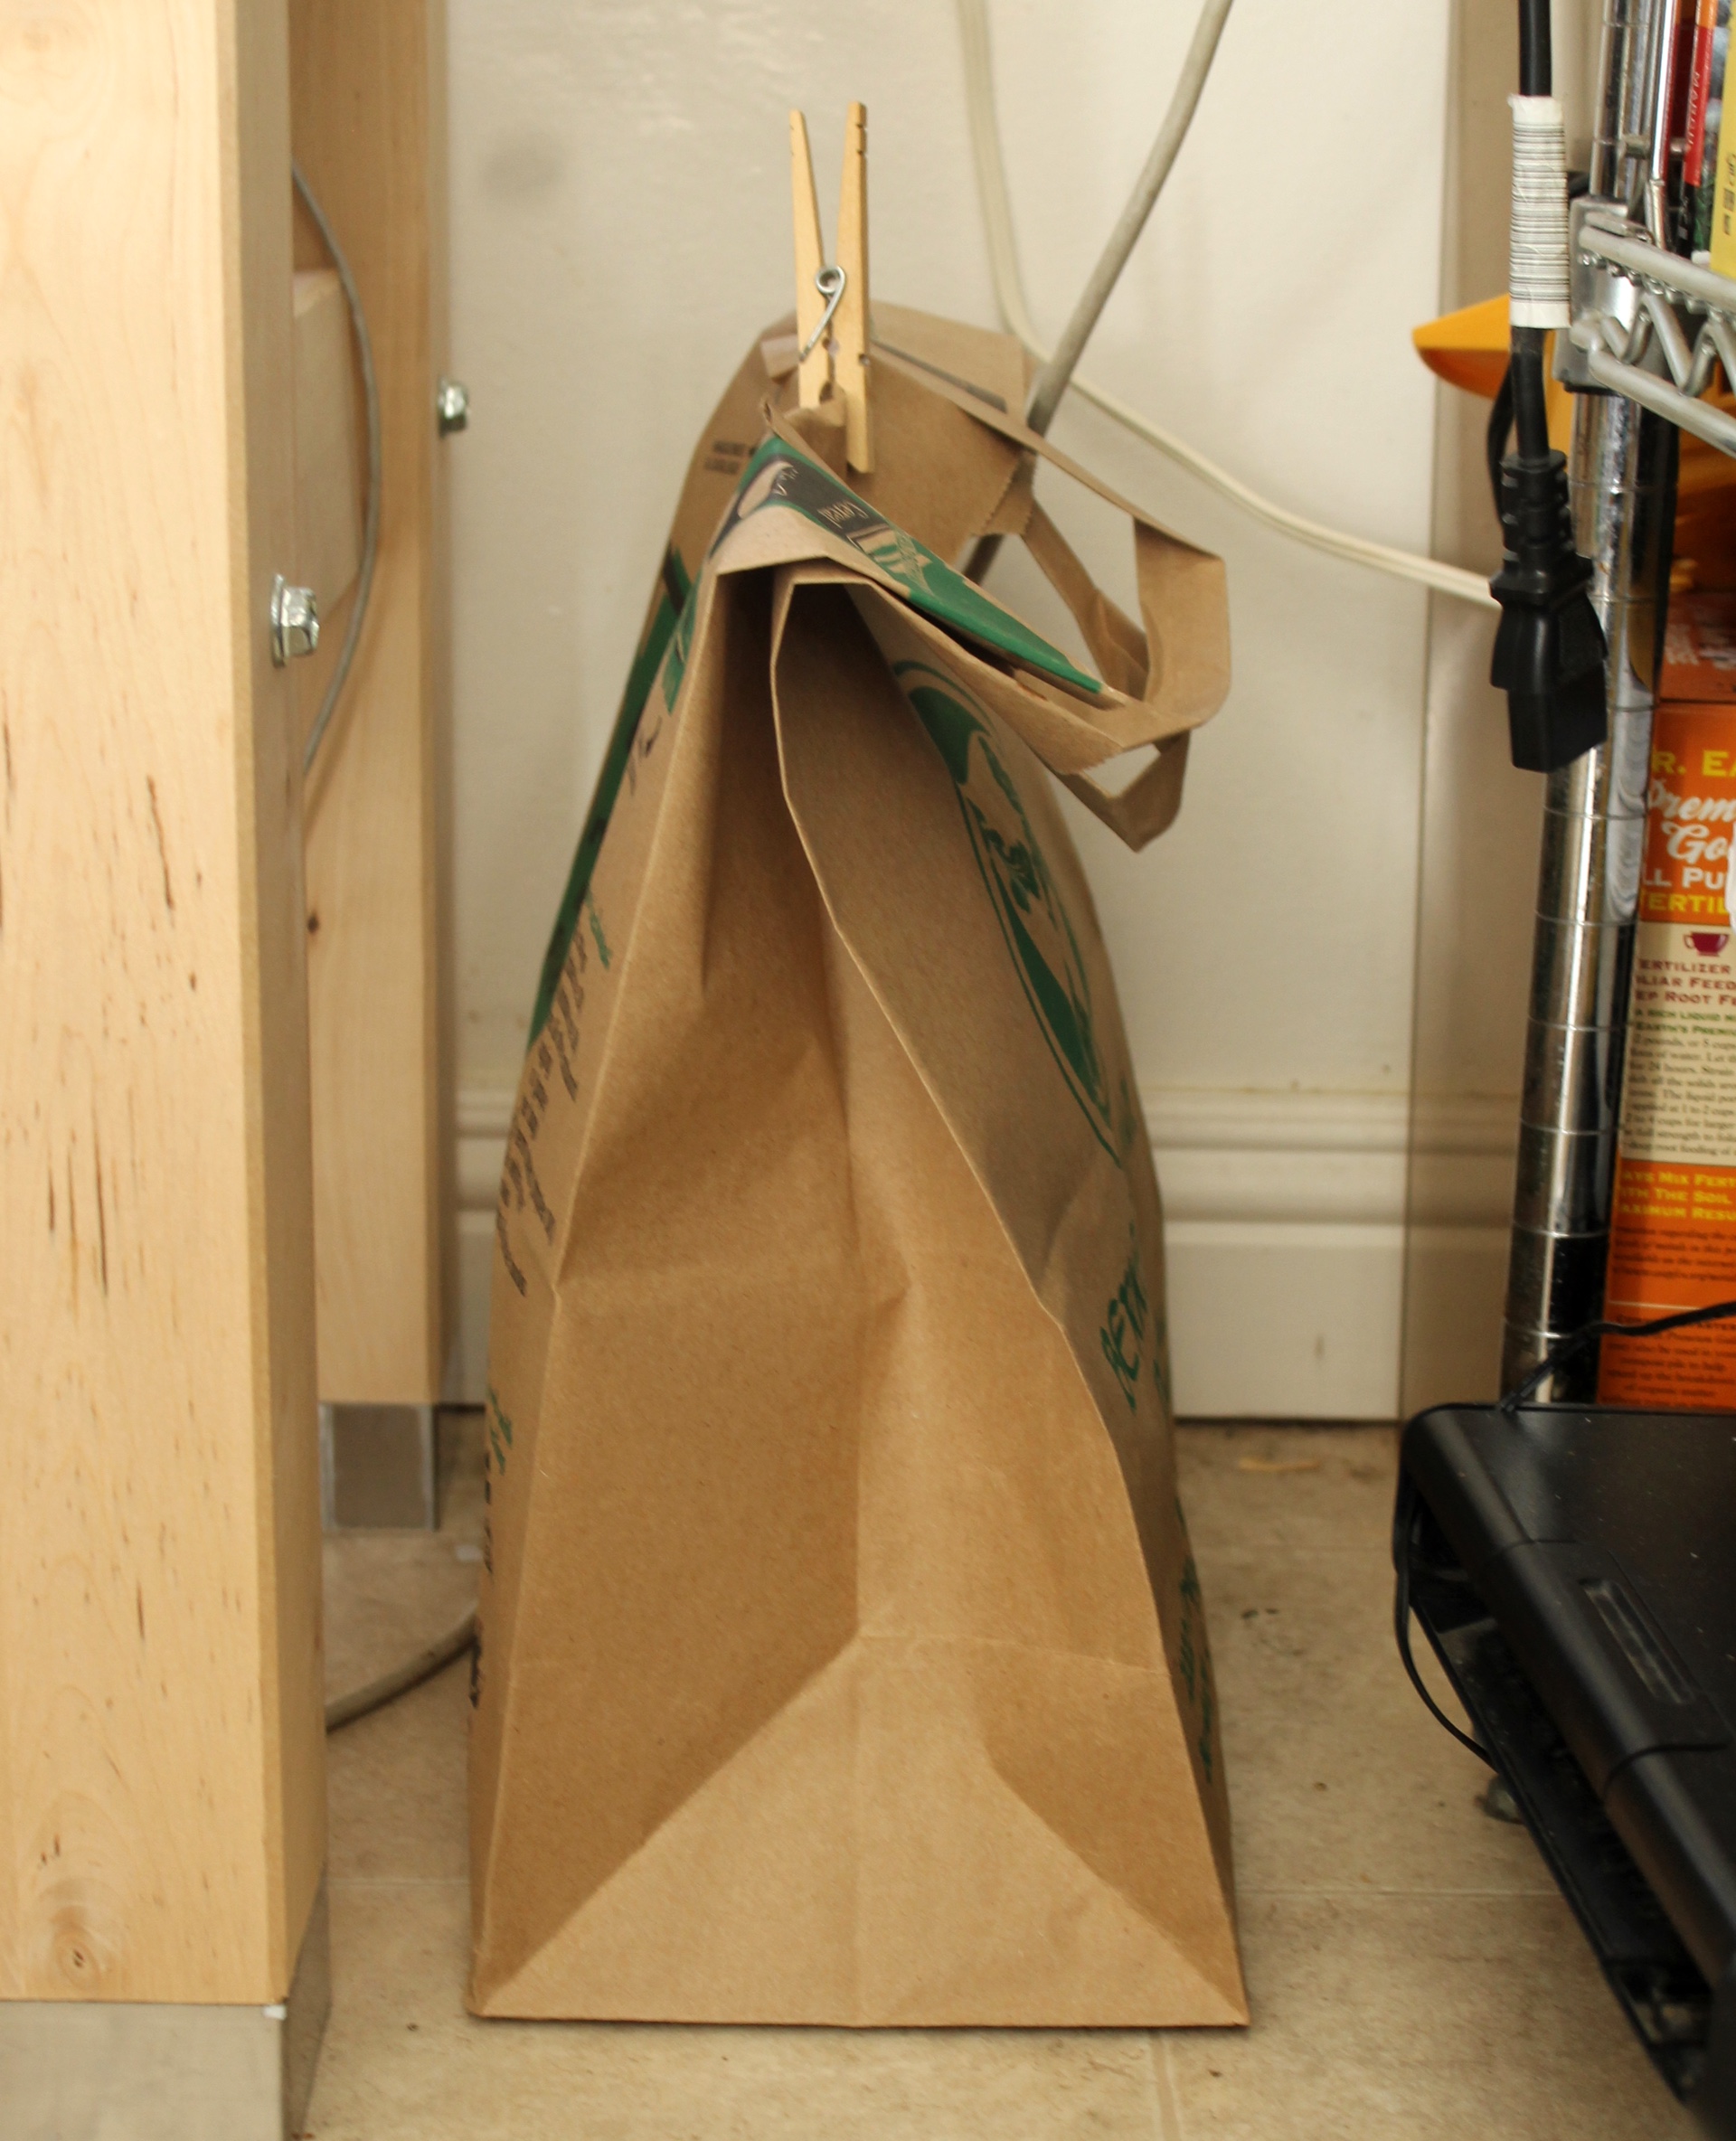 Place the bottles in a paper bag or cardboard box to carbonate in darkness.